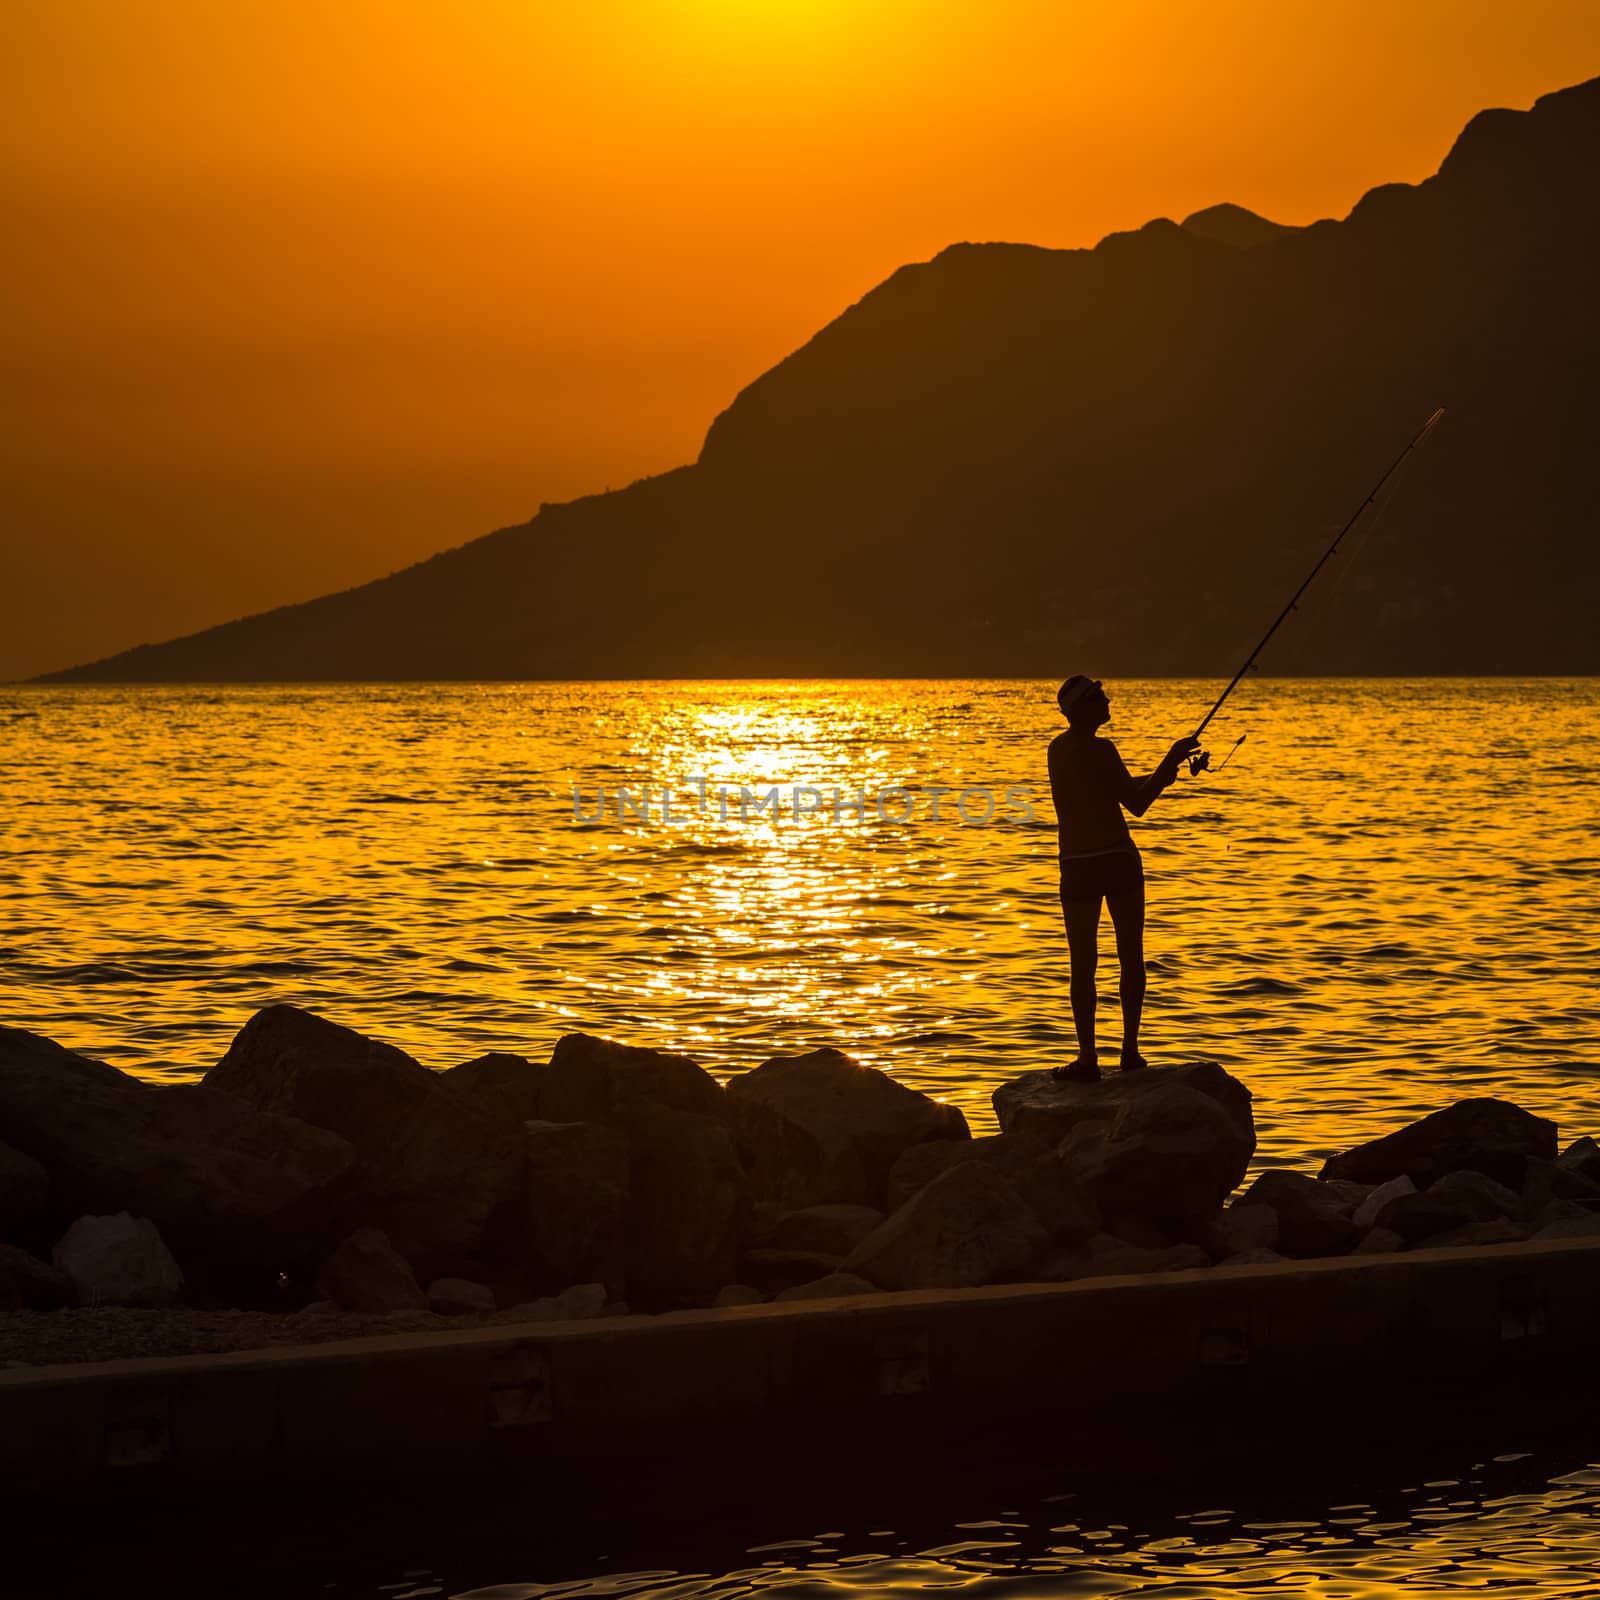 Fisherman silhouette on the beach at colorful sunset